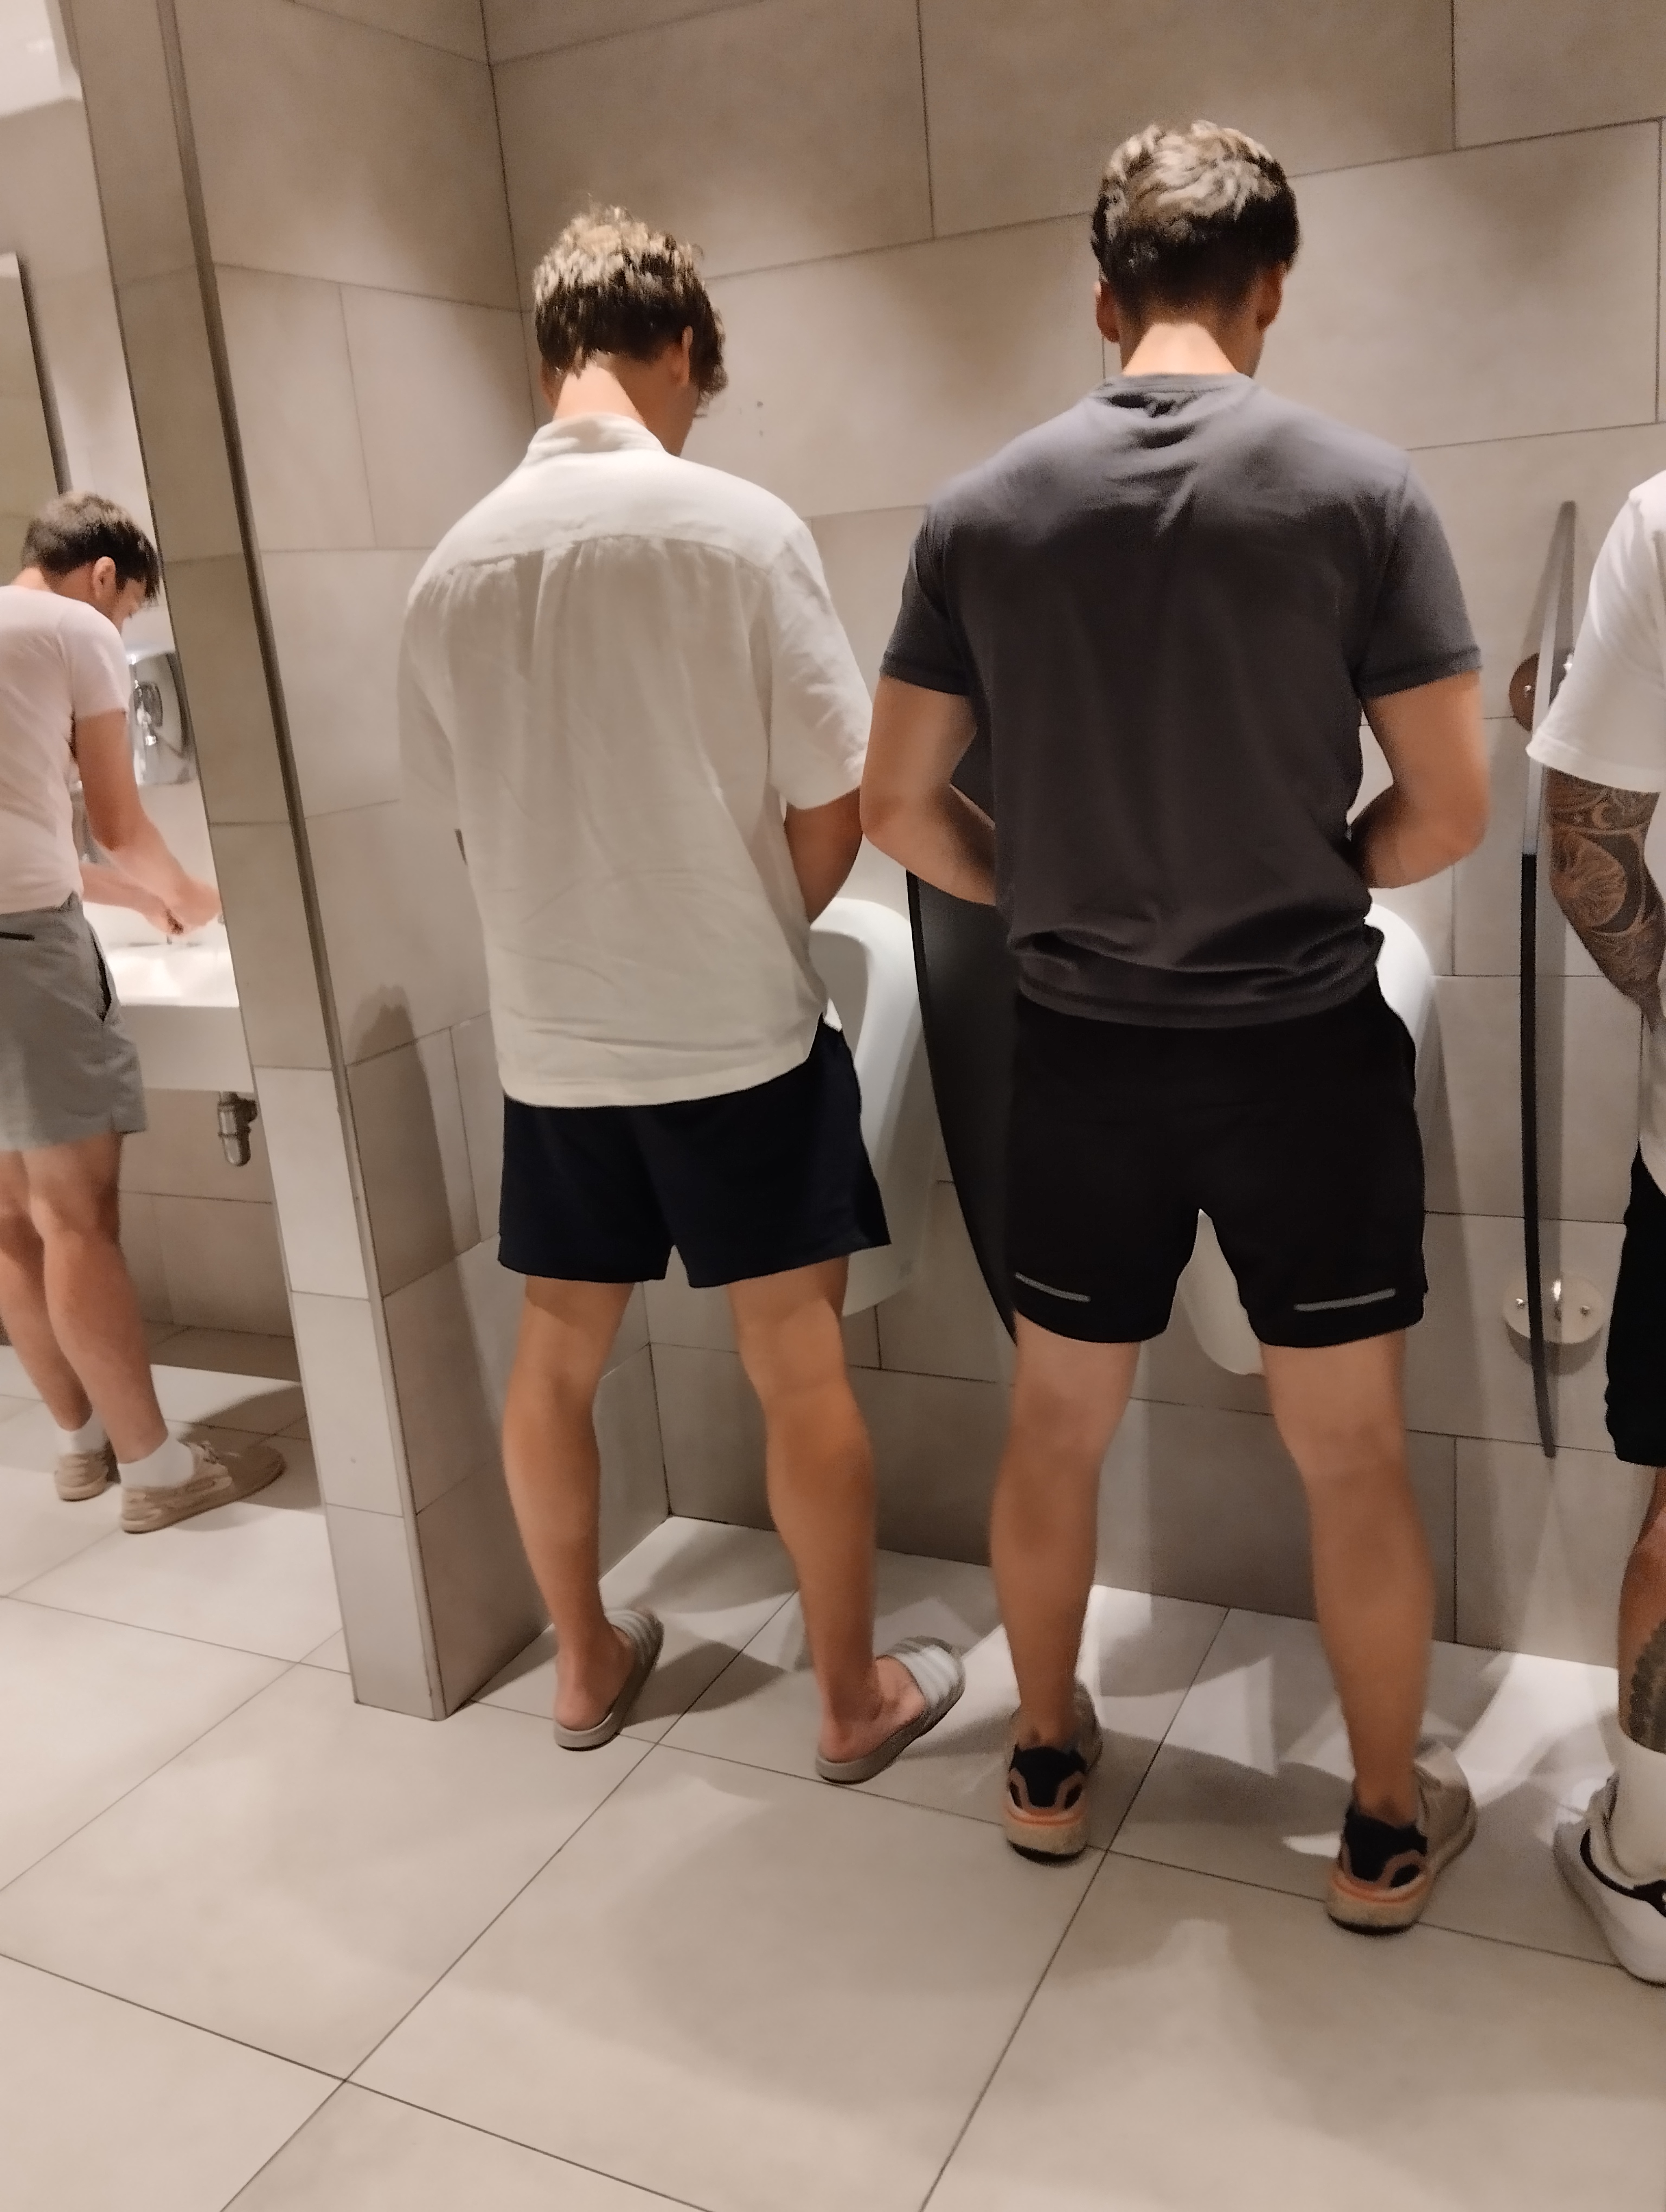 Two Norwegian brothers peeing at urinals in Italy